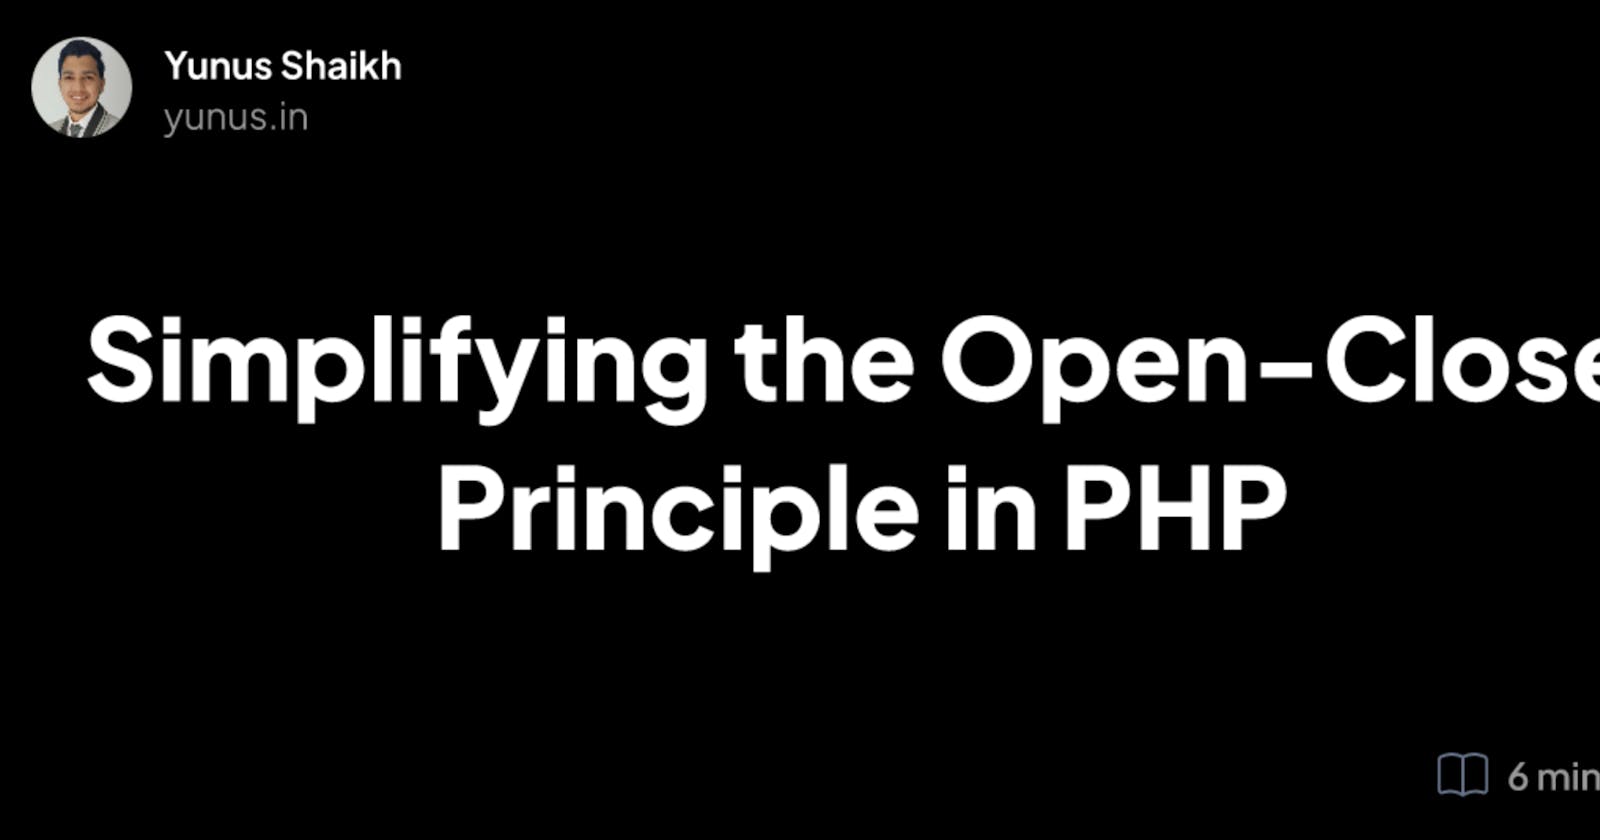 Simplifying the Open-Close Principle in PHP